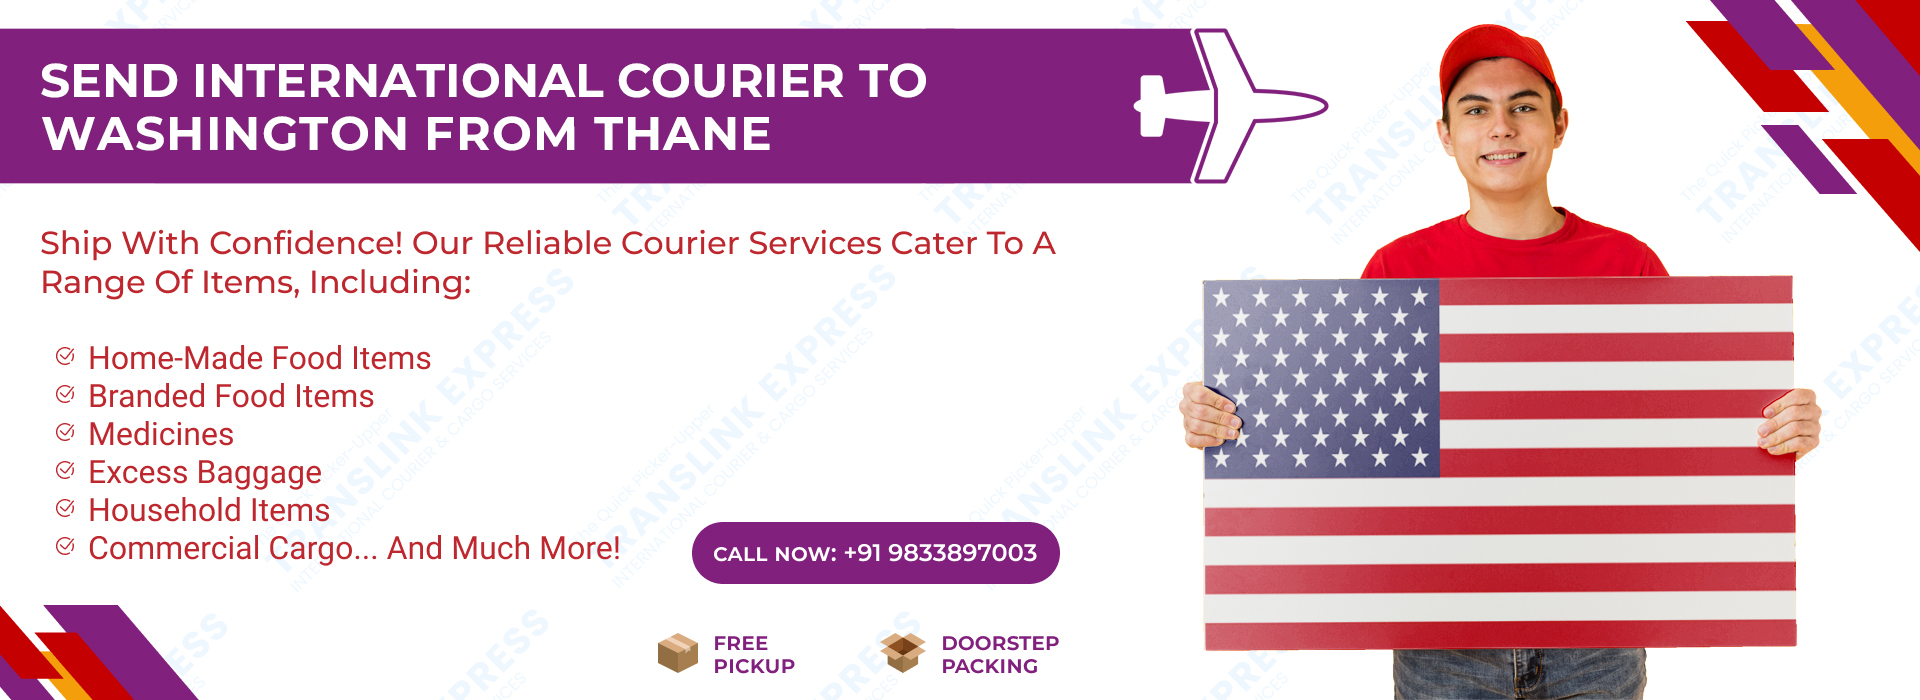 Courier to Washington From Thane